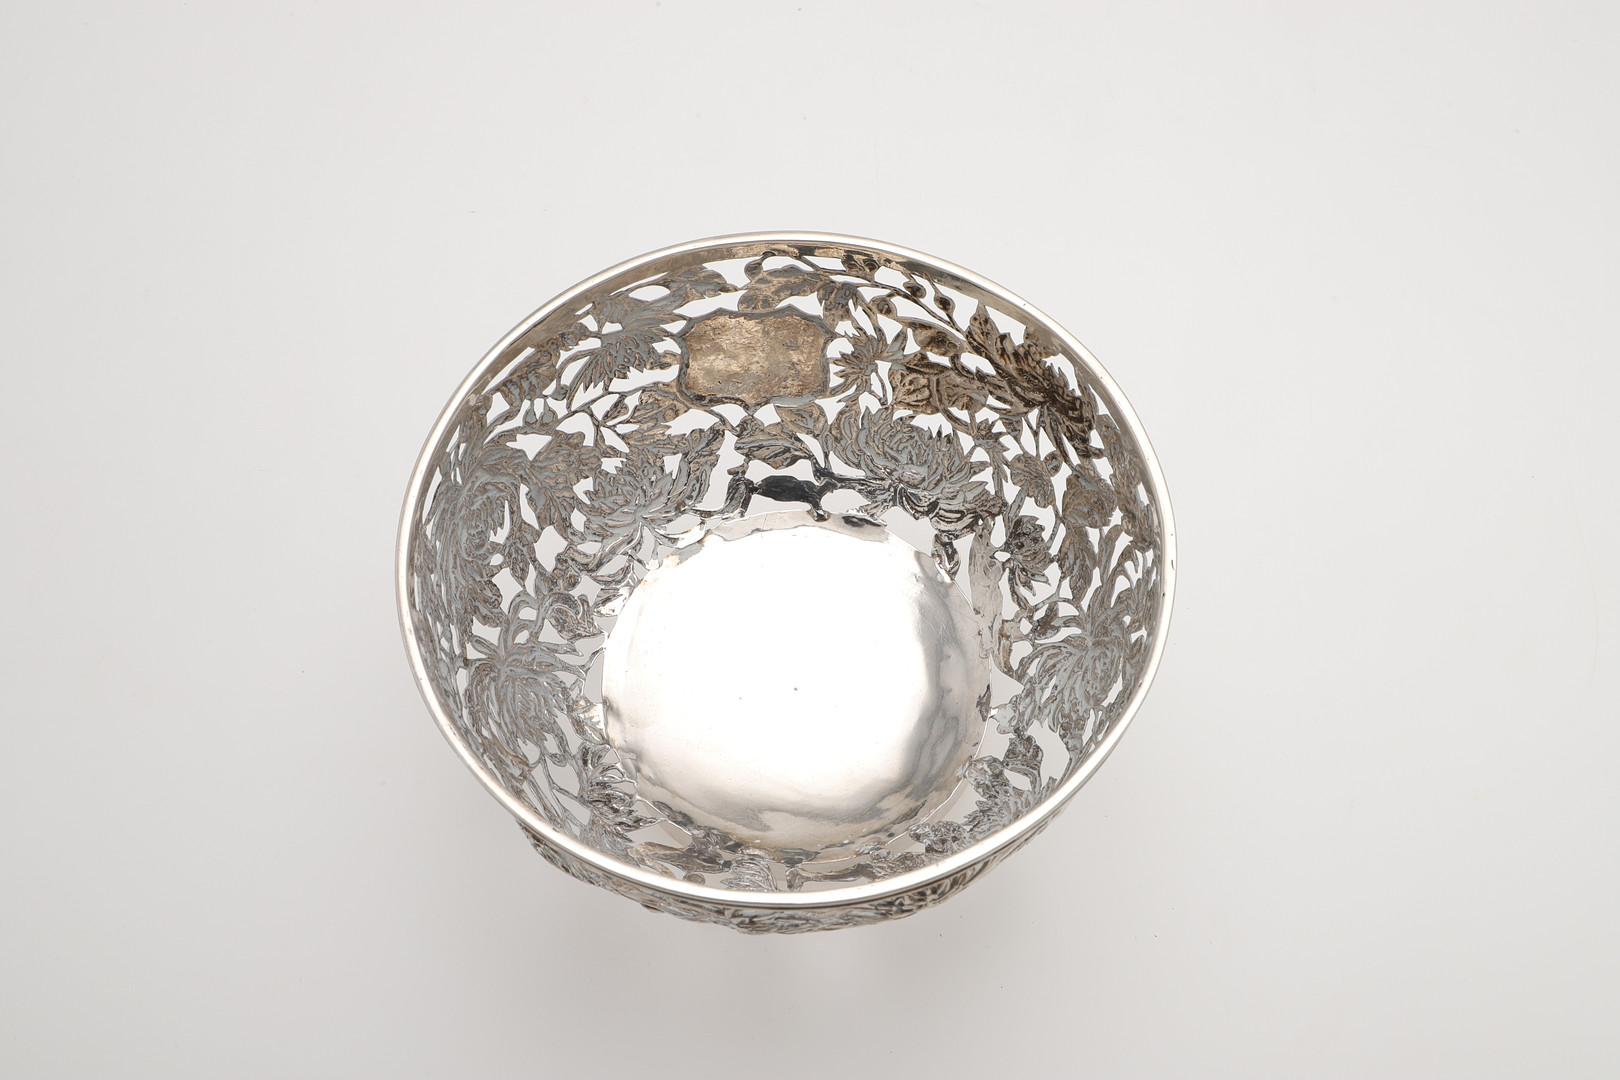 A LATE 19TH/ EARLY 20TH CENTURY CHINESE SILVER ROSE BOWL. - Image 4 of 6